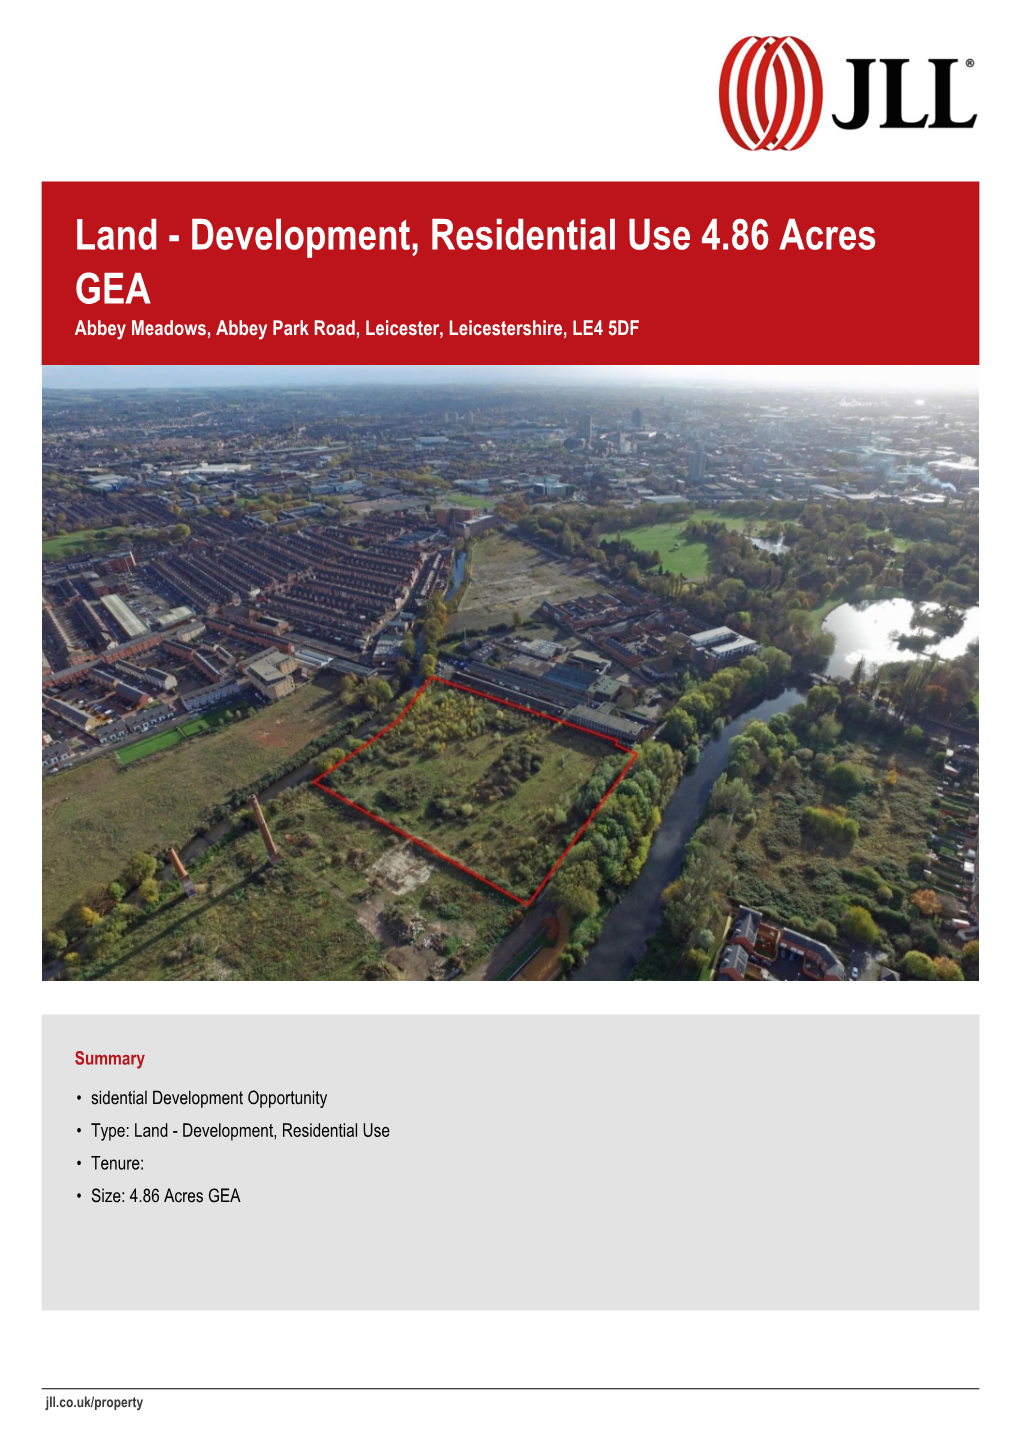 Development, Residential Use 4.86 Acres GEA Abbey Meadows, Abbey Park Road, Leicester, Leicestershire, LE4 5DF